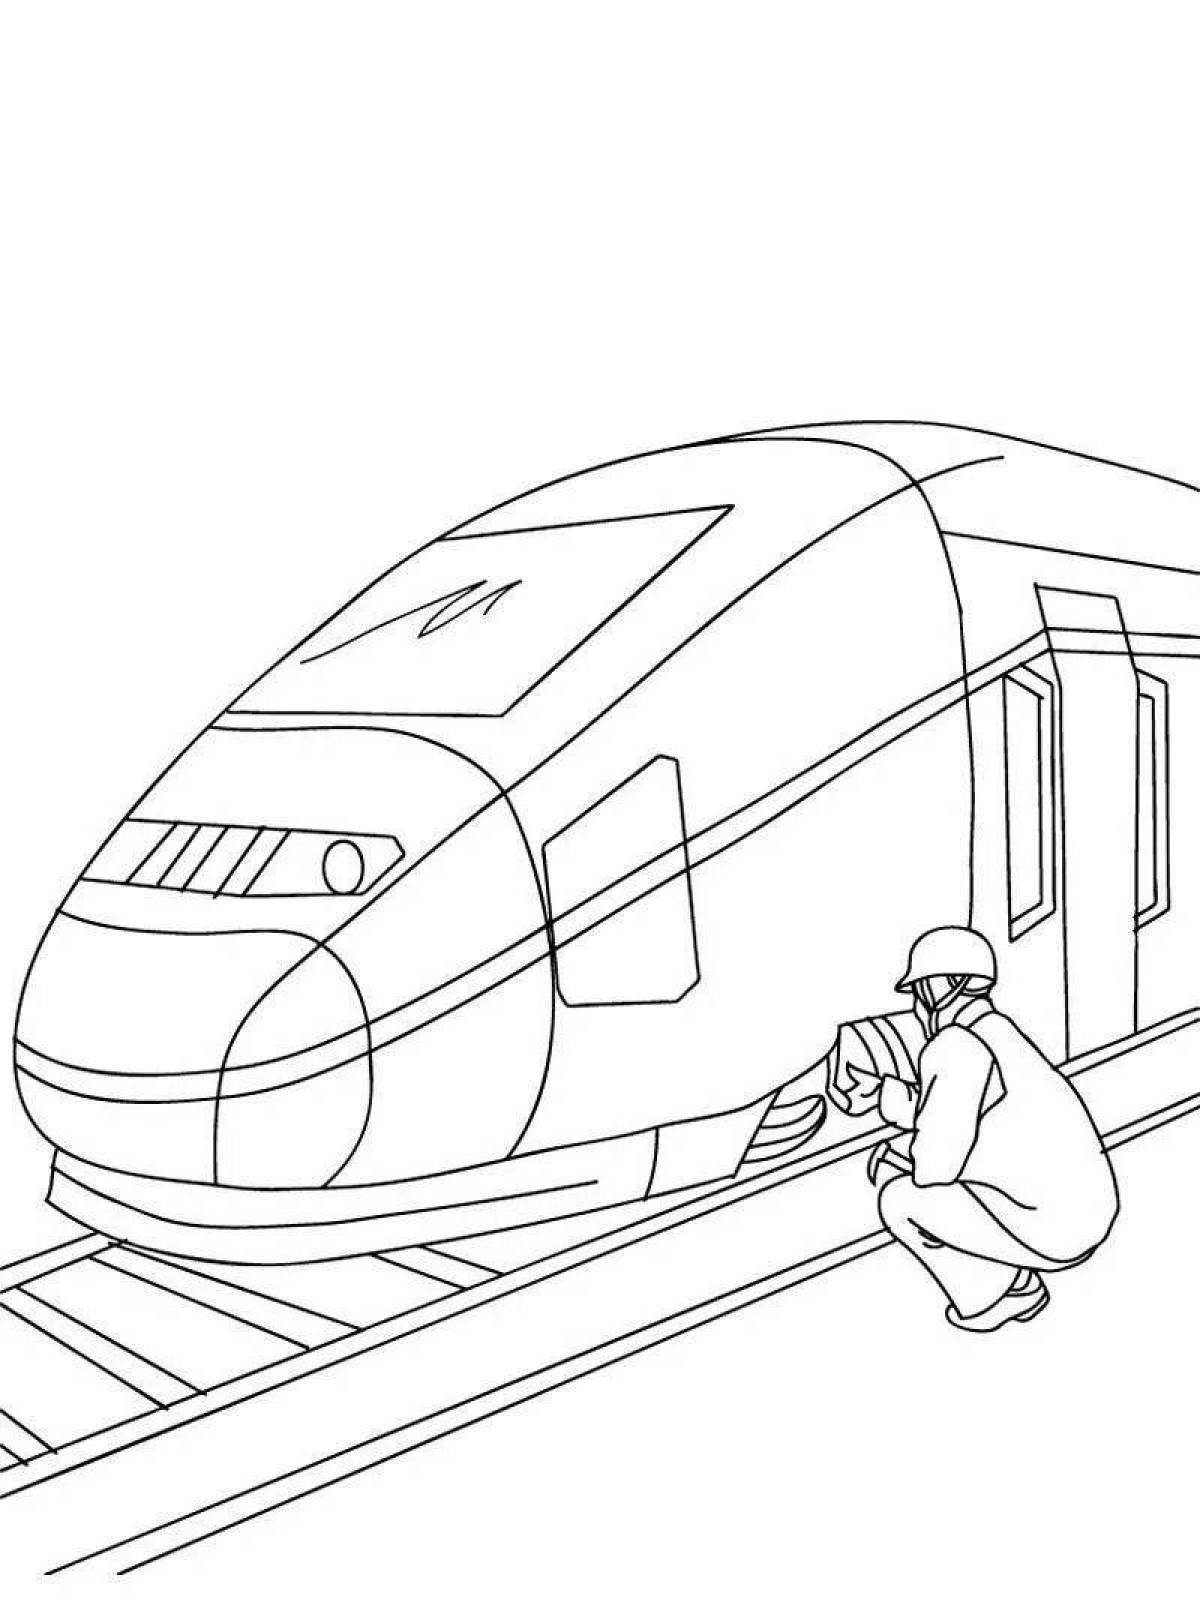 Colorful electric train coloring book